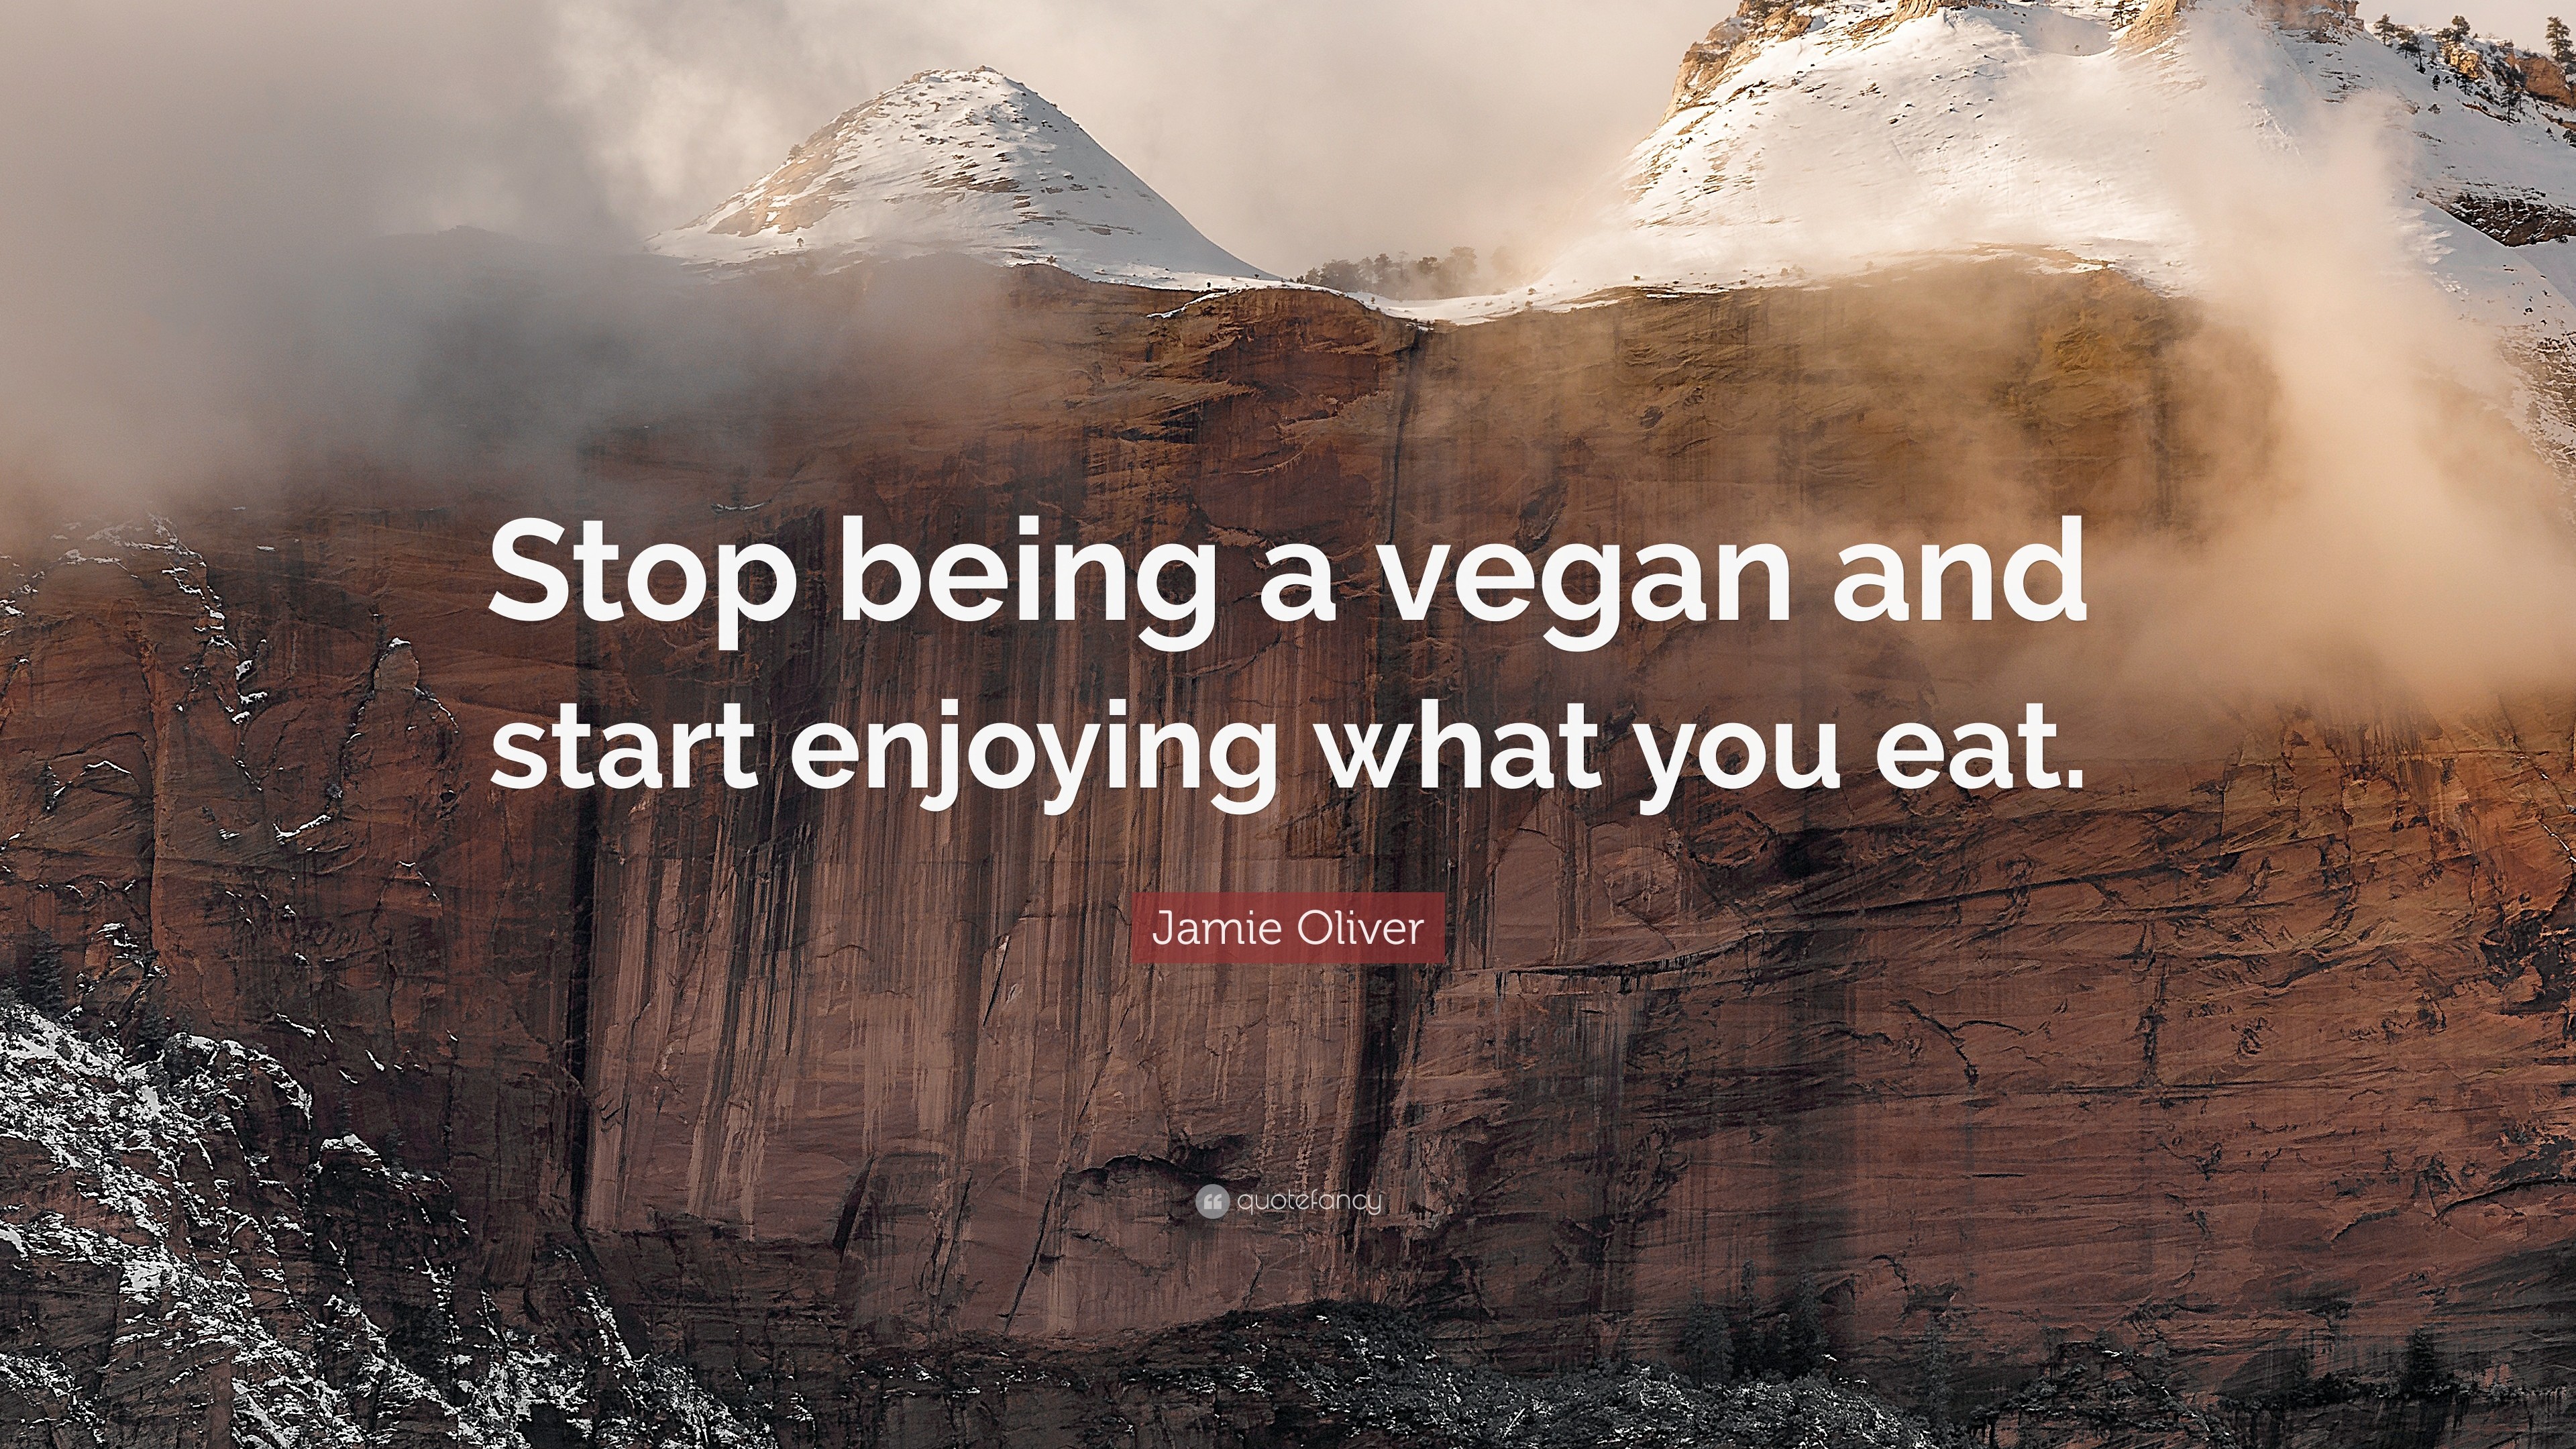 3840x2160 Jamie Oliver Quote: “Stop being a vegan and start enjoying what you eat.